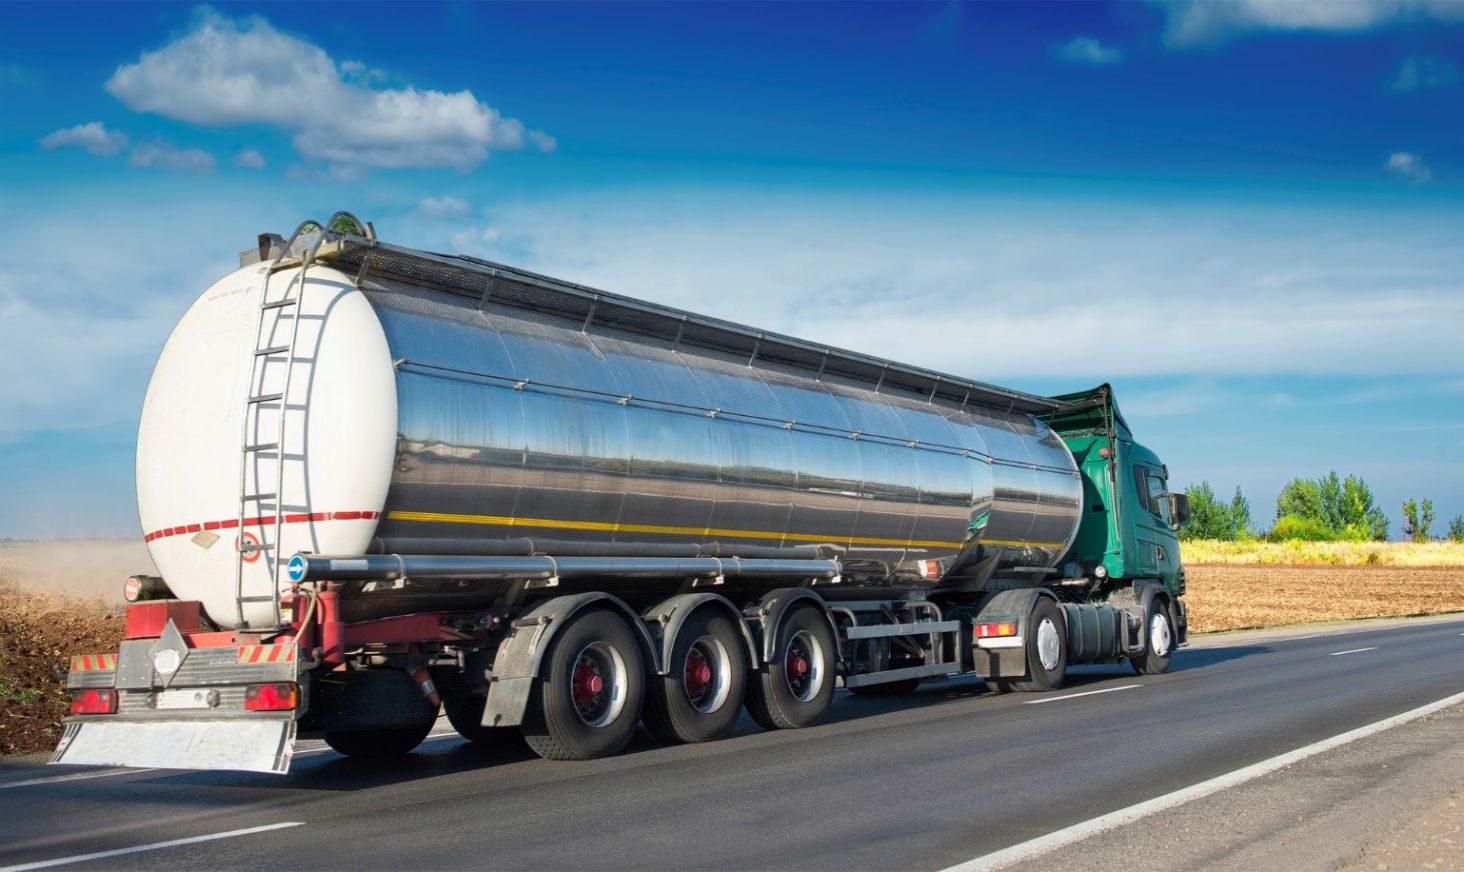 How To Start a Tanker Truck Business Plans